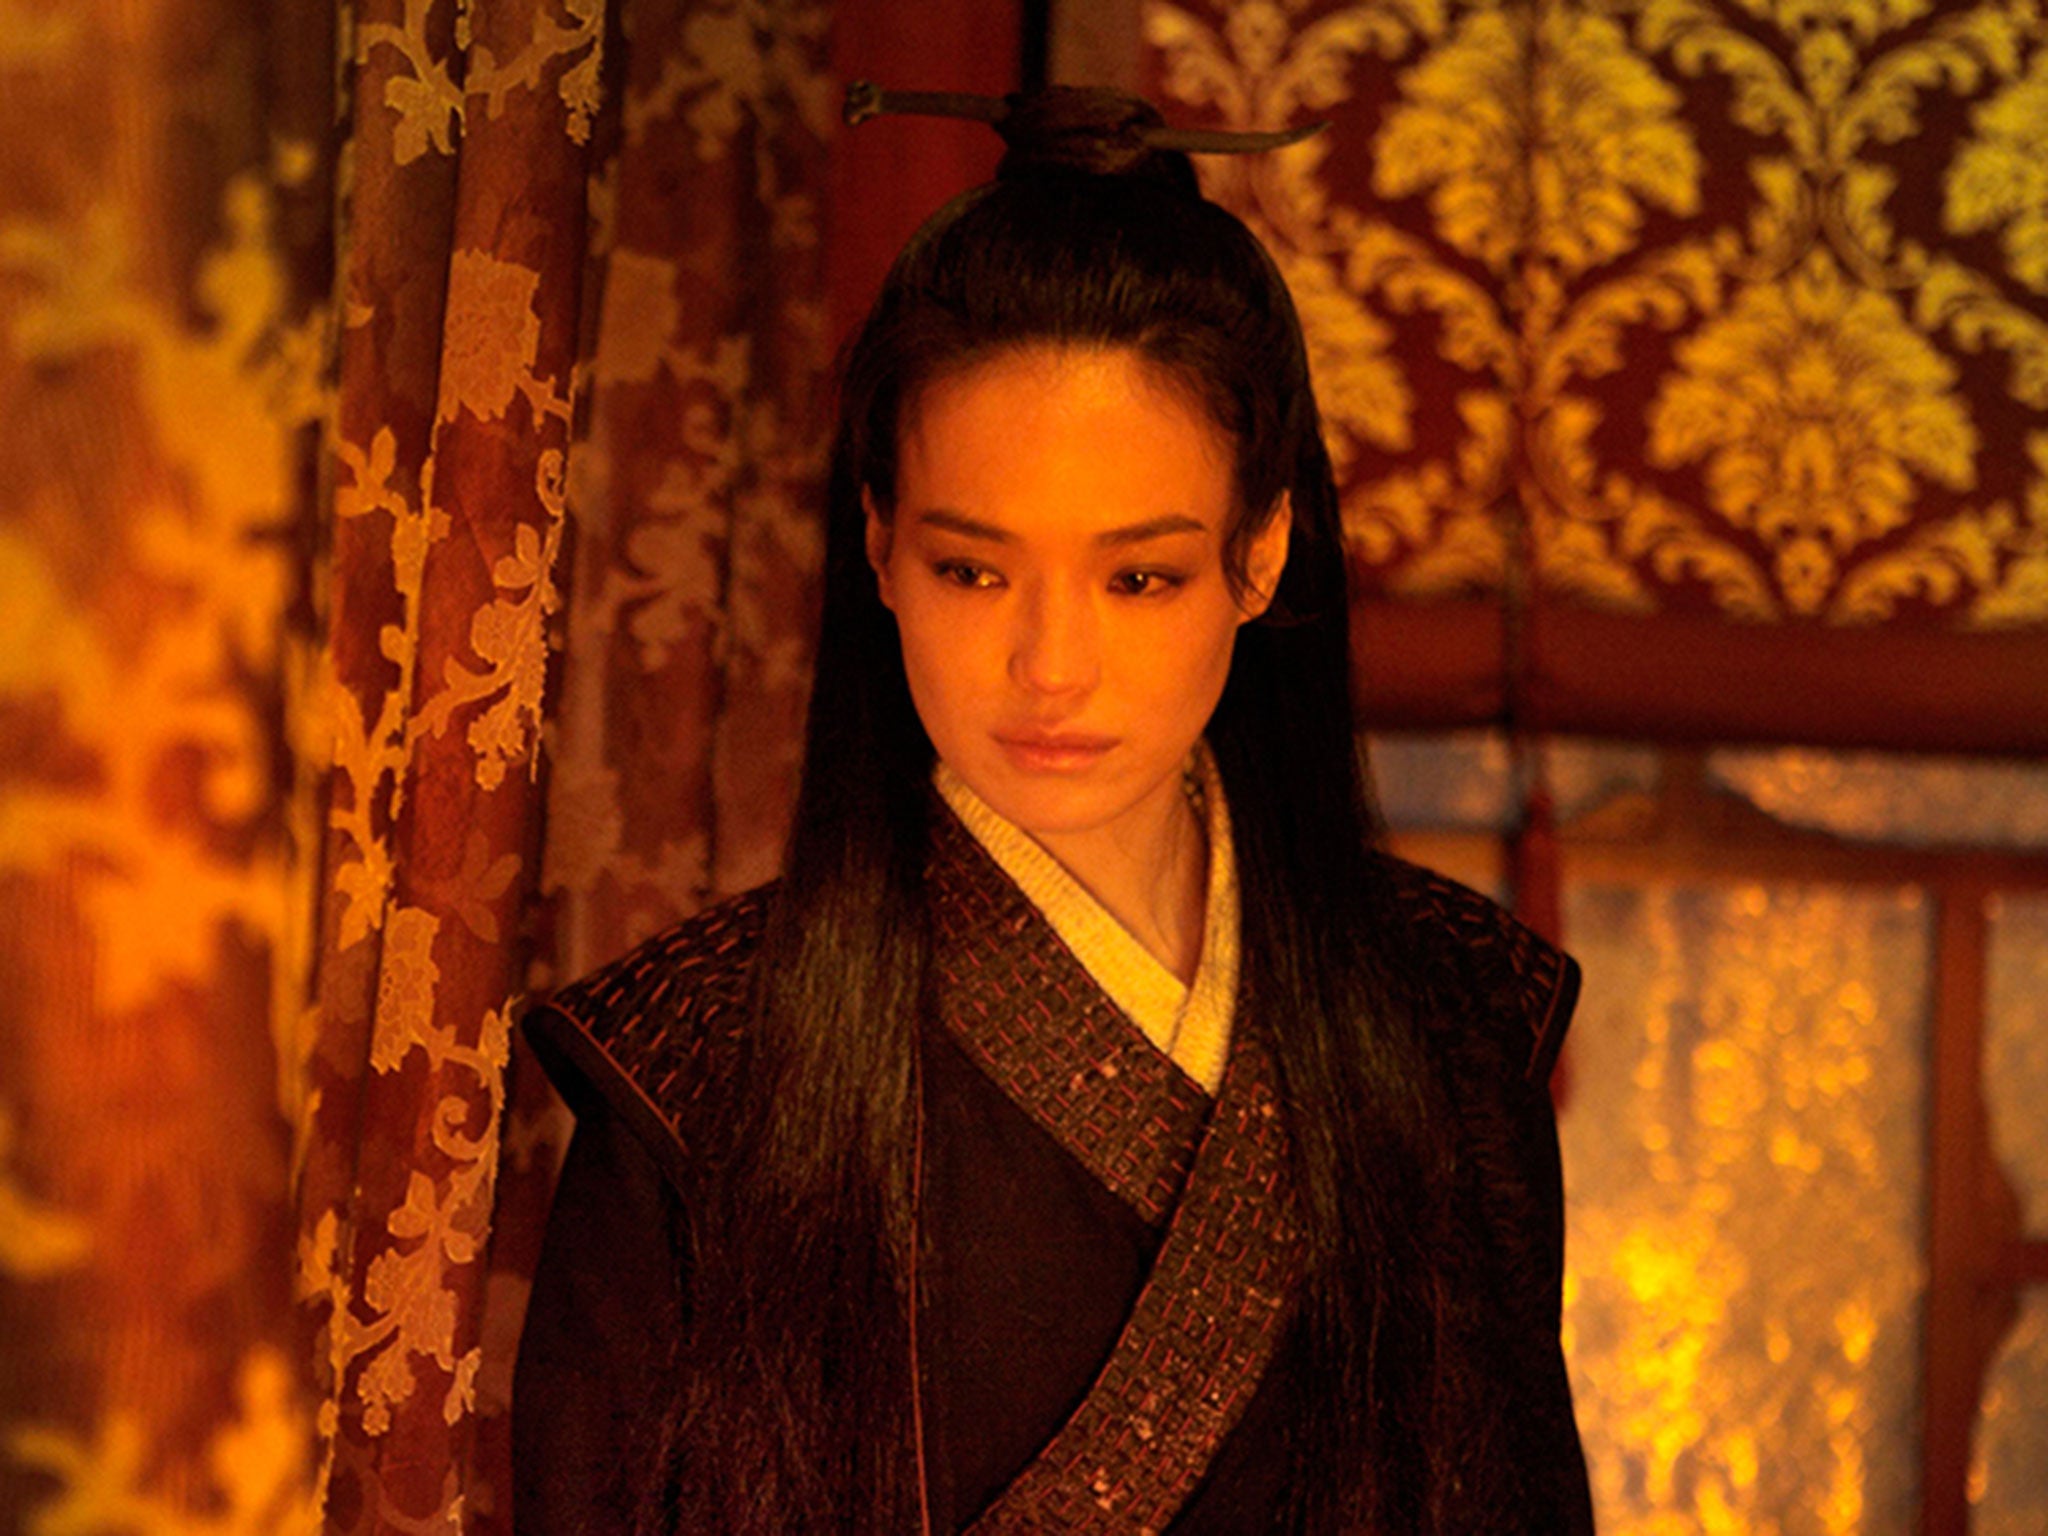 Understated: Shu Qi stars in ‘The Assassin’, Hsiao-Hsien Hou’s exquisitely made drama set in 9th-century China